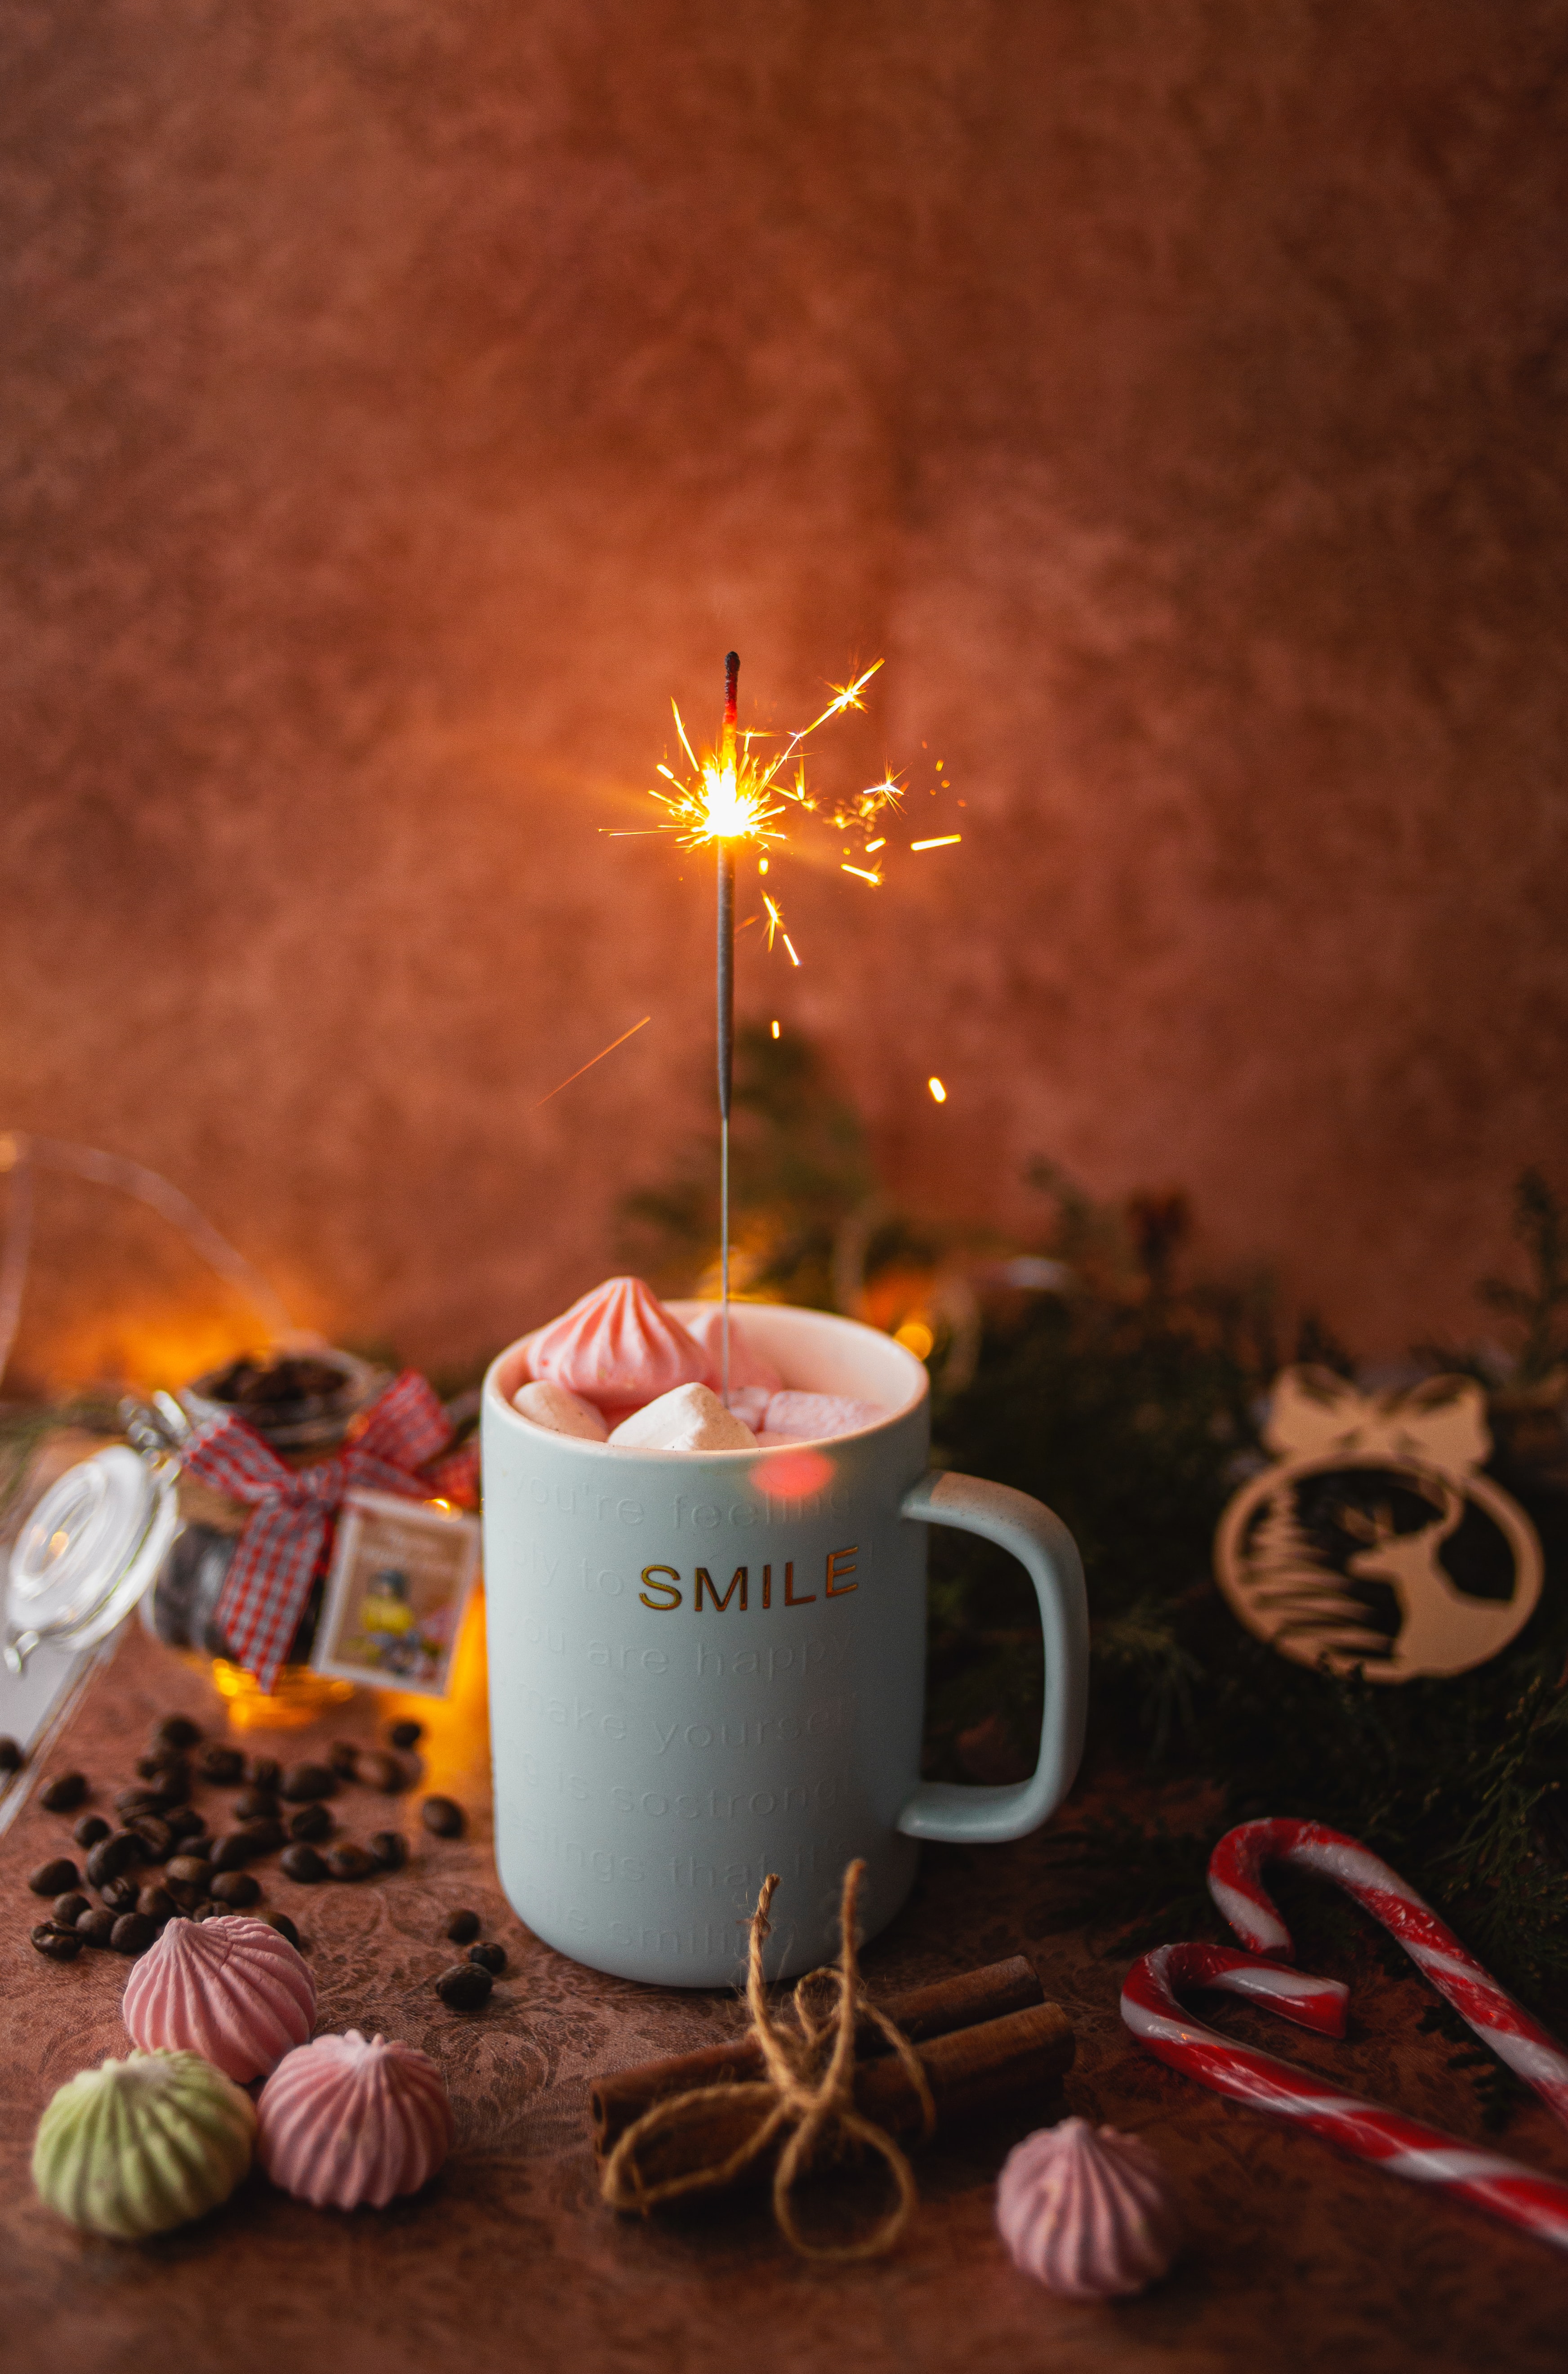 miscellanea, mug, holiday, sparks, cup, miscellaneous, marshmallow, bengal lights, sparklers, zephyr Aesthetic wallpaper